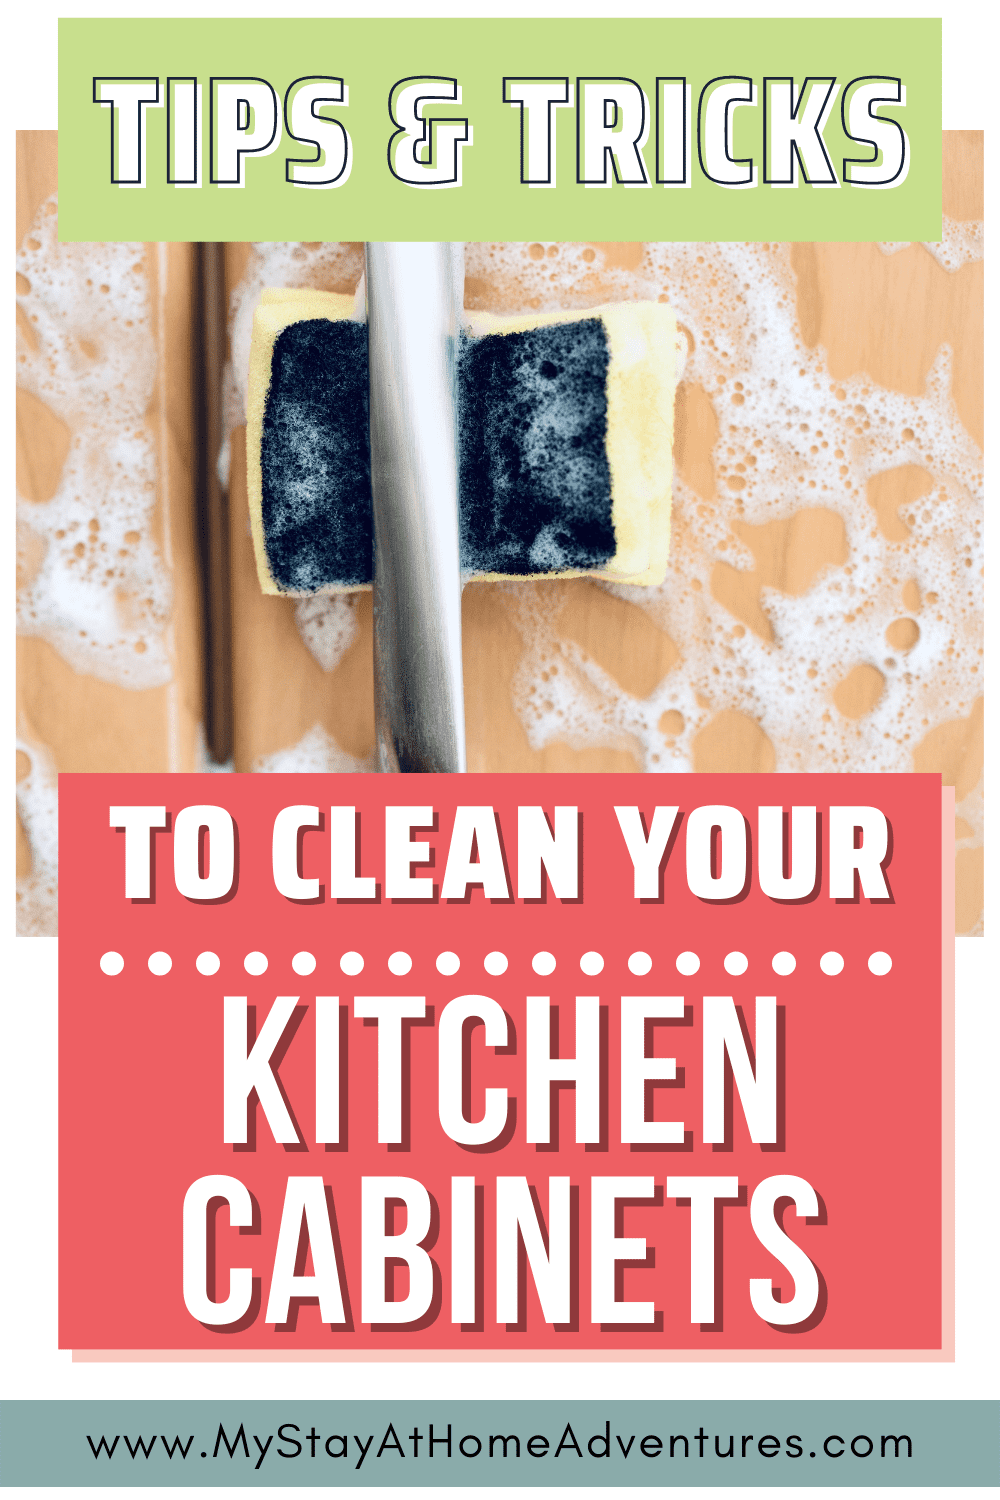 Follow these tips on how to clean kitchen cabinets without damaging the wood finish. You’ll also learn how to keep them fresh and shiny. #cleaning #cleaningtips via @mystayathome